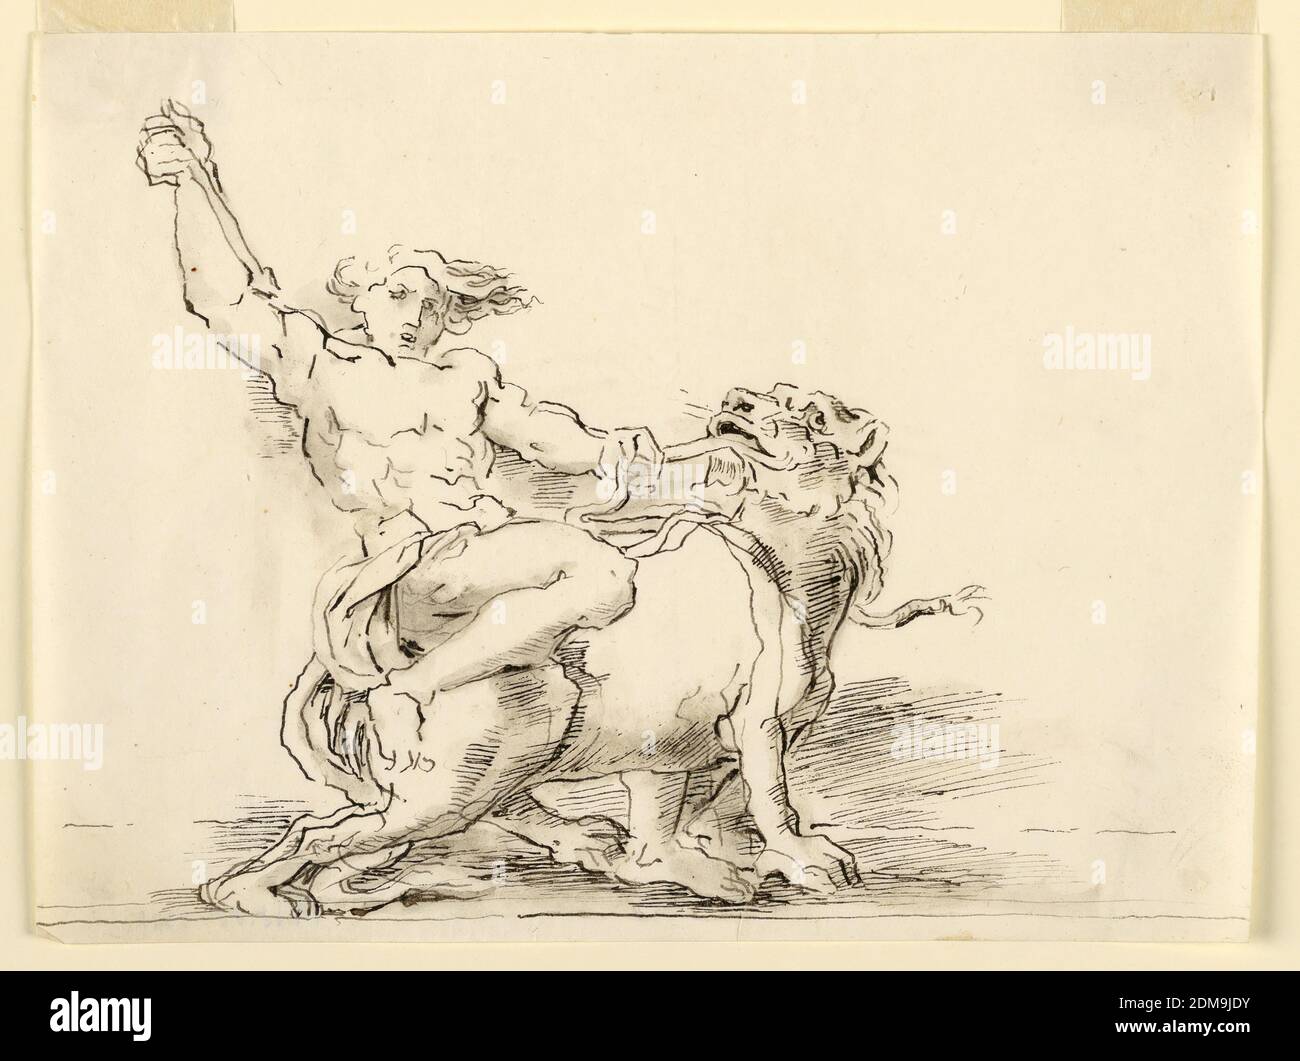 Sketch, Hercules Slaying the Lion (?), Fortunato Duranti, Italian, 1787 - 1863, Pen and ink, brush and wash on paper, Sketch, Hercules Slaying the Lion (?)., Rome, Italy, 1820–1850, Drawing Stock Photo